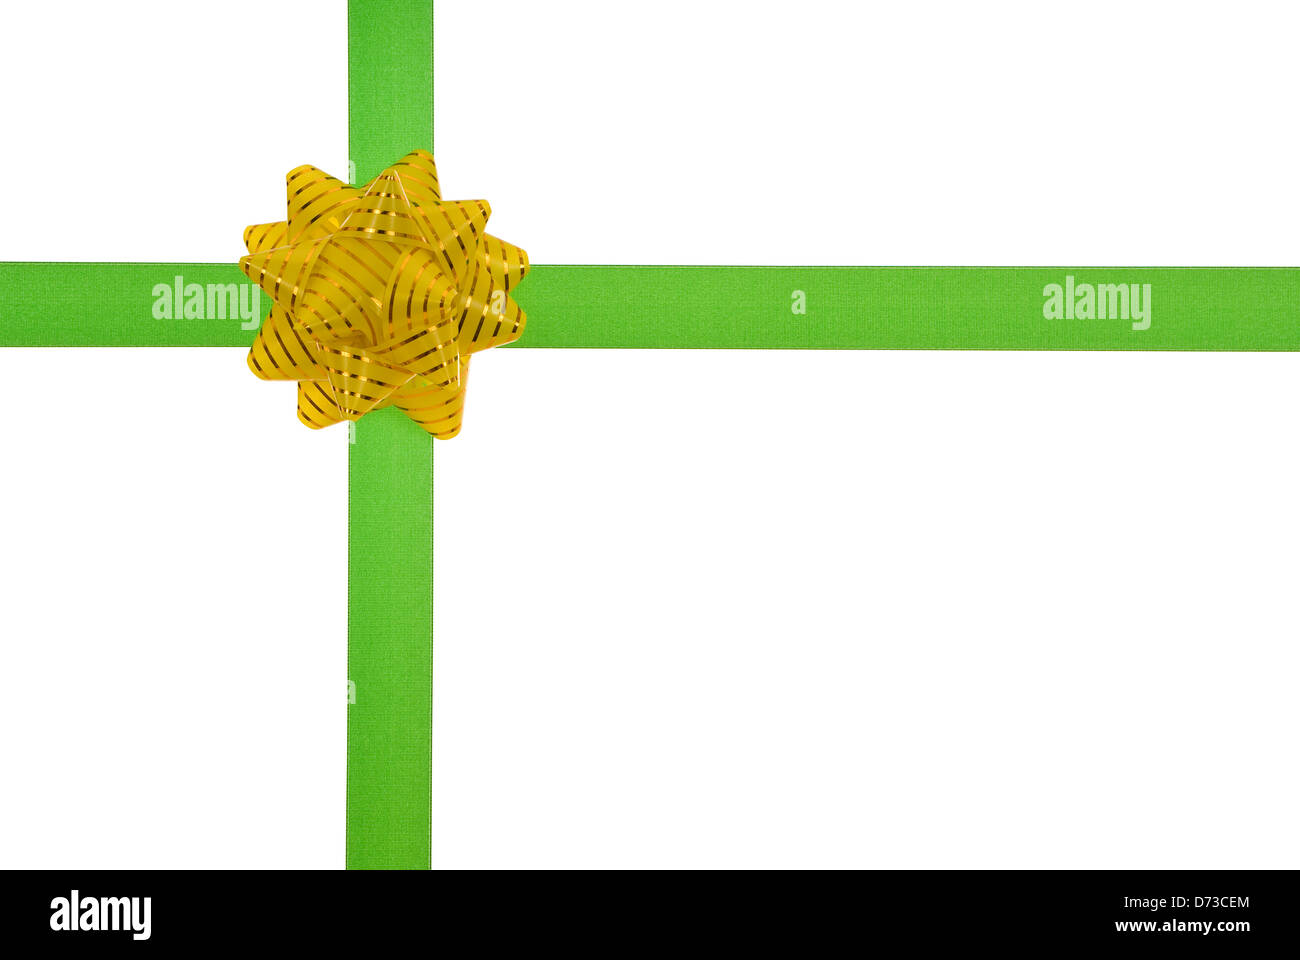 green ribbon with yellow bow on gift Stock Photo